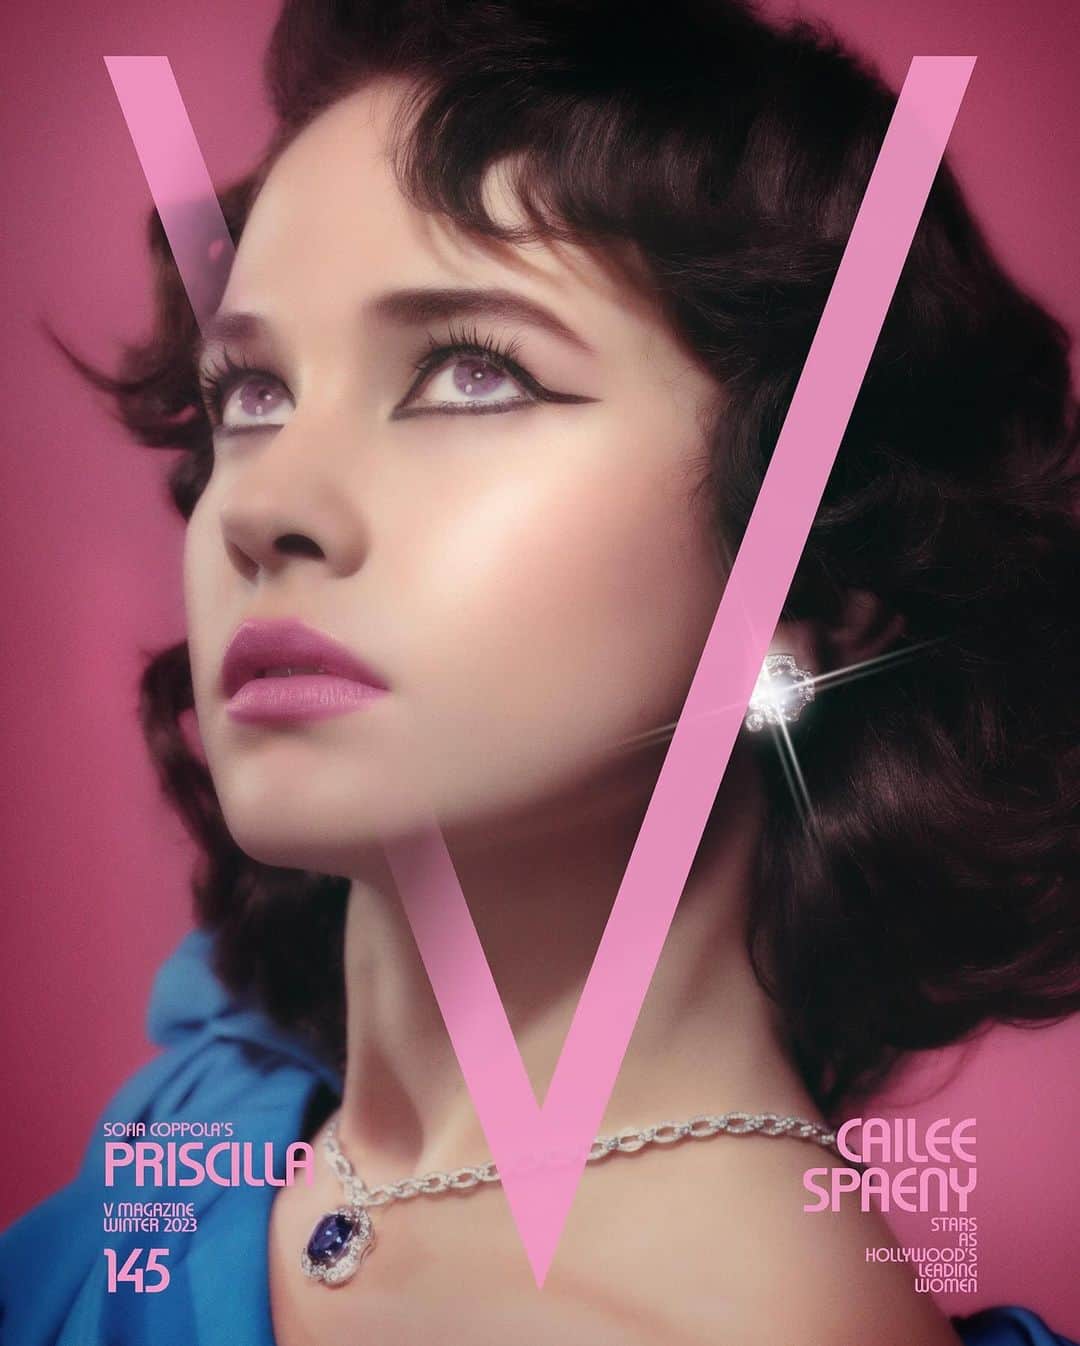 V Magazineのインスタグラム：「In the spotlight of our new V145 Winter 2023 issue and Sofia Coppola’s highly anticipated film @priscillamovie, #CaileeSpaeny takes center stage.   Cover 3 of 3: Cailee Spaeny as the visionary Elizabeth Taylor.   Born in Knoxville, Tennessee and raised in southern Missouri, #CaileeSpaeny’s childhood was filled with unforgettable visits to Graceland, where the timeless echoes of Elvis Presley's 'If I Can Dream' colored her memories. “Elvis is American royalty but in the South, he’s like a God,” she tells V. Now, in a twist of fate, Spaeny is portrays Priscilla in Sofia Coppola’s latest masterpiece.  Inside the pages of our newest V145 issue, V sat down with Spaeny to talk entertainment in the Southern Midwest, catching the eyes of Sofia Coppola, and stepping into the roles of Hollywood’s most iconic leading women. Read the full story at the link in our bio + Pre-order your copy of V145 at shop.vmagazine.com. — From V145 Winter 2023 Photography @robrusling123 (@fecreatives) Fashion @annatrevelyan Creative Director / Editor-in-chief #StephenGan  Makeup @lauradomini2 using @drbarbarasturm (@streetersagency) Hair @francogobbihair using @fragilecosmetics (@streetersagency) Manicure @nailsby_julia_ (@afrankagency) Interview @savsob Set Design @_tobias_b Retouching @studio__rm  Production @fabiomayor (@mayorproductions) Casting @itboygregk (@gkldprojects)  This issue will be available on newsstands starting November 10, 2023.   Wearing dress @alexandermcqueen / All jewelry @bulgari」